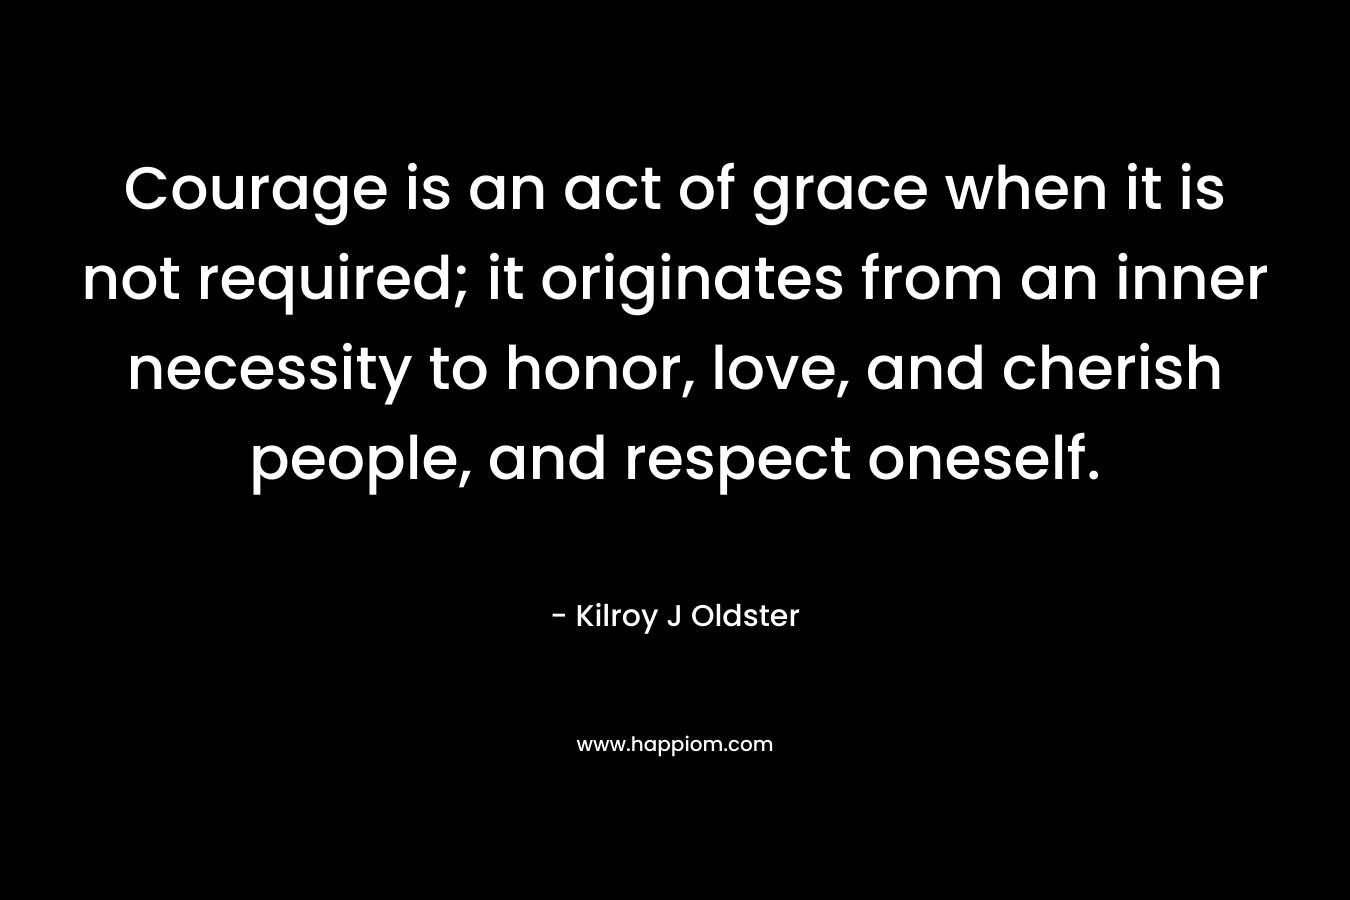 Courage is an act of grace when it is not required; it originates from an inner necessity to honor, love, and cherish people, and respect oneself.